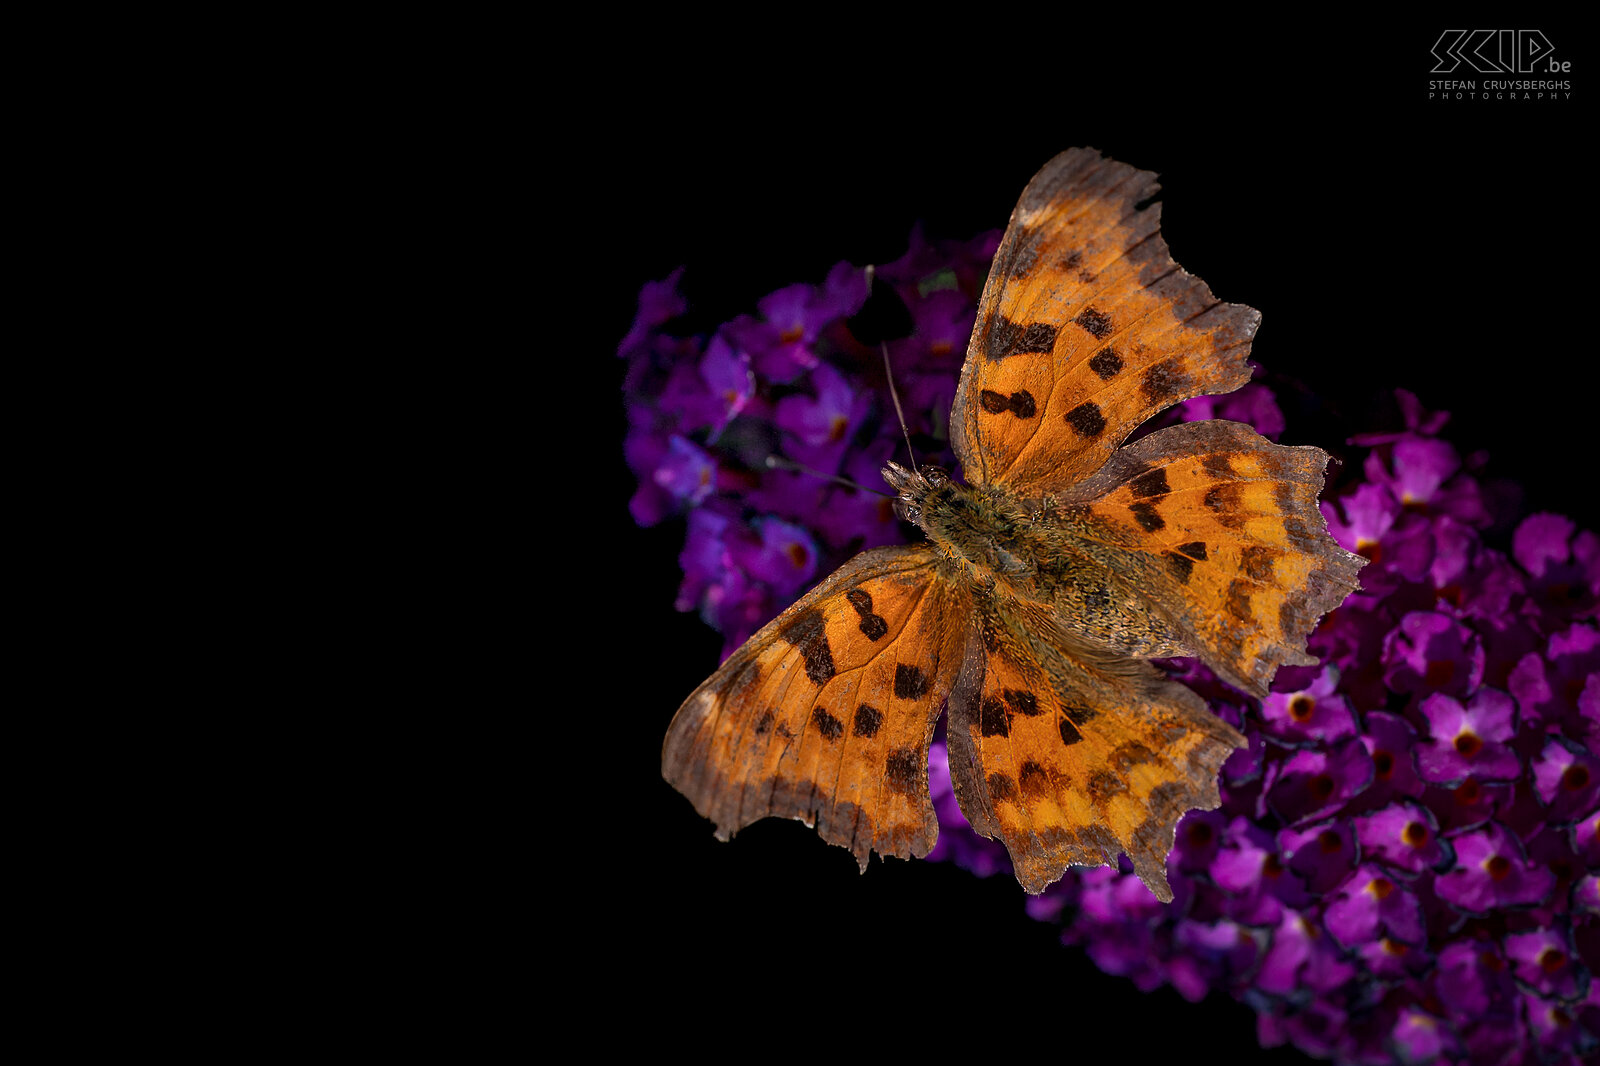 Butterflies - Comma The comma (Polygonia c-album) is a common butterfly with wing that are irregularly dentate, excavated and angulated, the inside color is orange and the hindwings have a white spot in the shape of a C. Stefan Cruysberghs